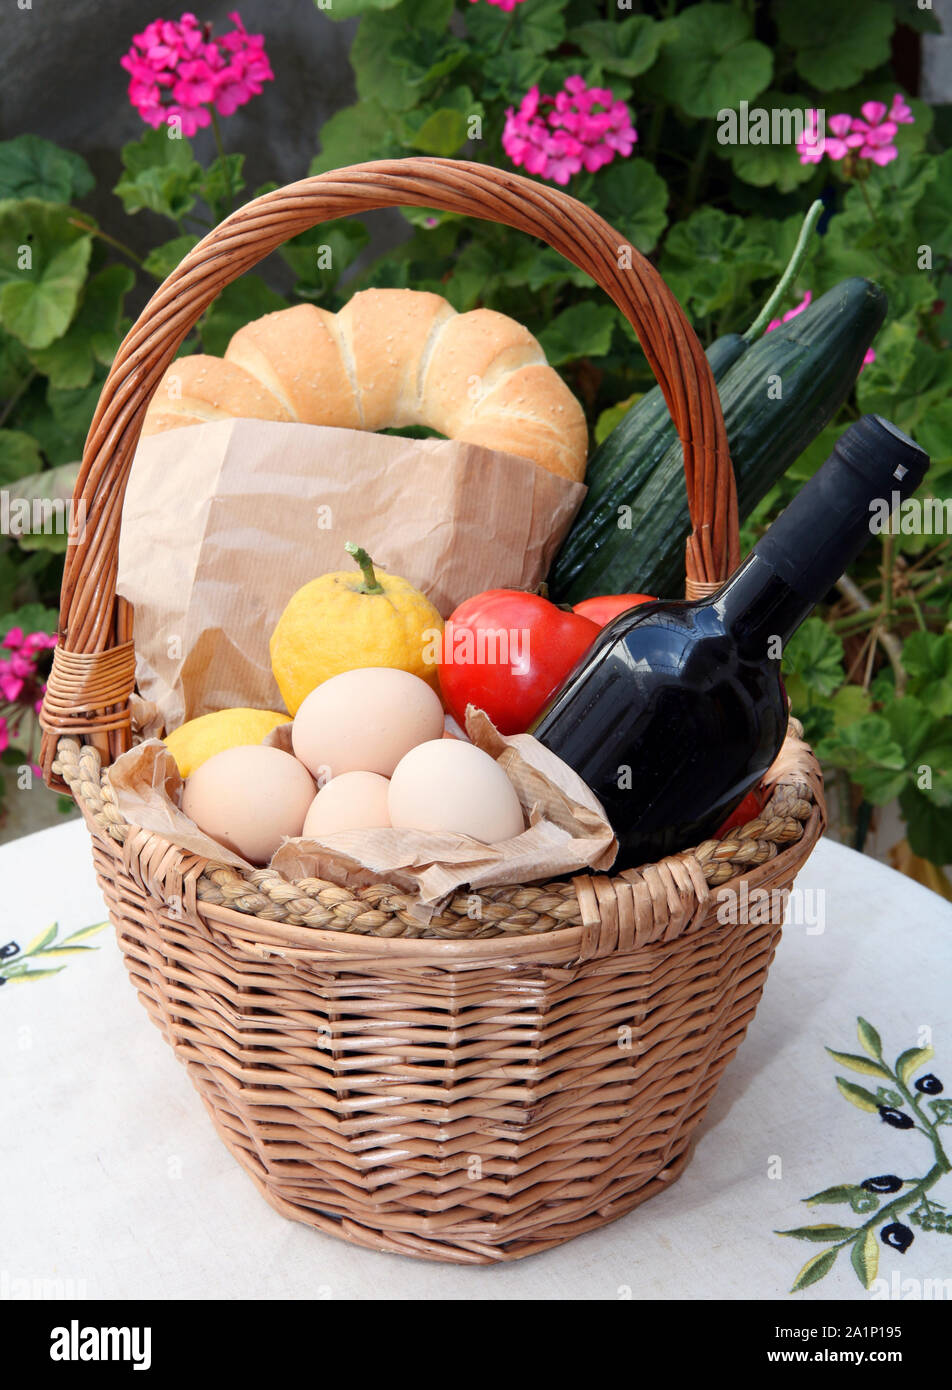 Wicker shopping basket with traditional Greek goods, wine, eggs, cucumber, bread ring, tomato, lemon, on a table with geranium flowers behind, No plas Stock Photo